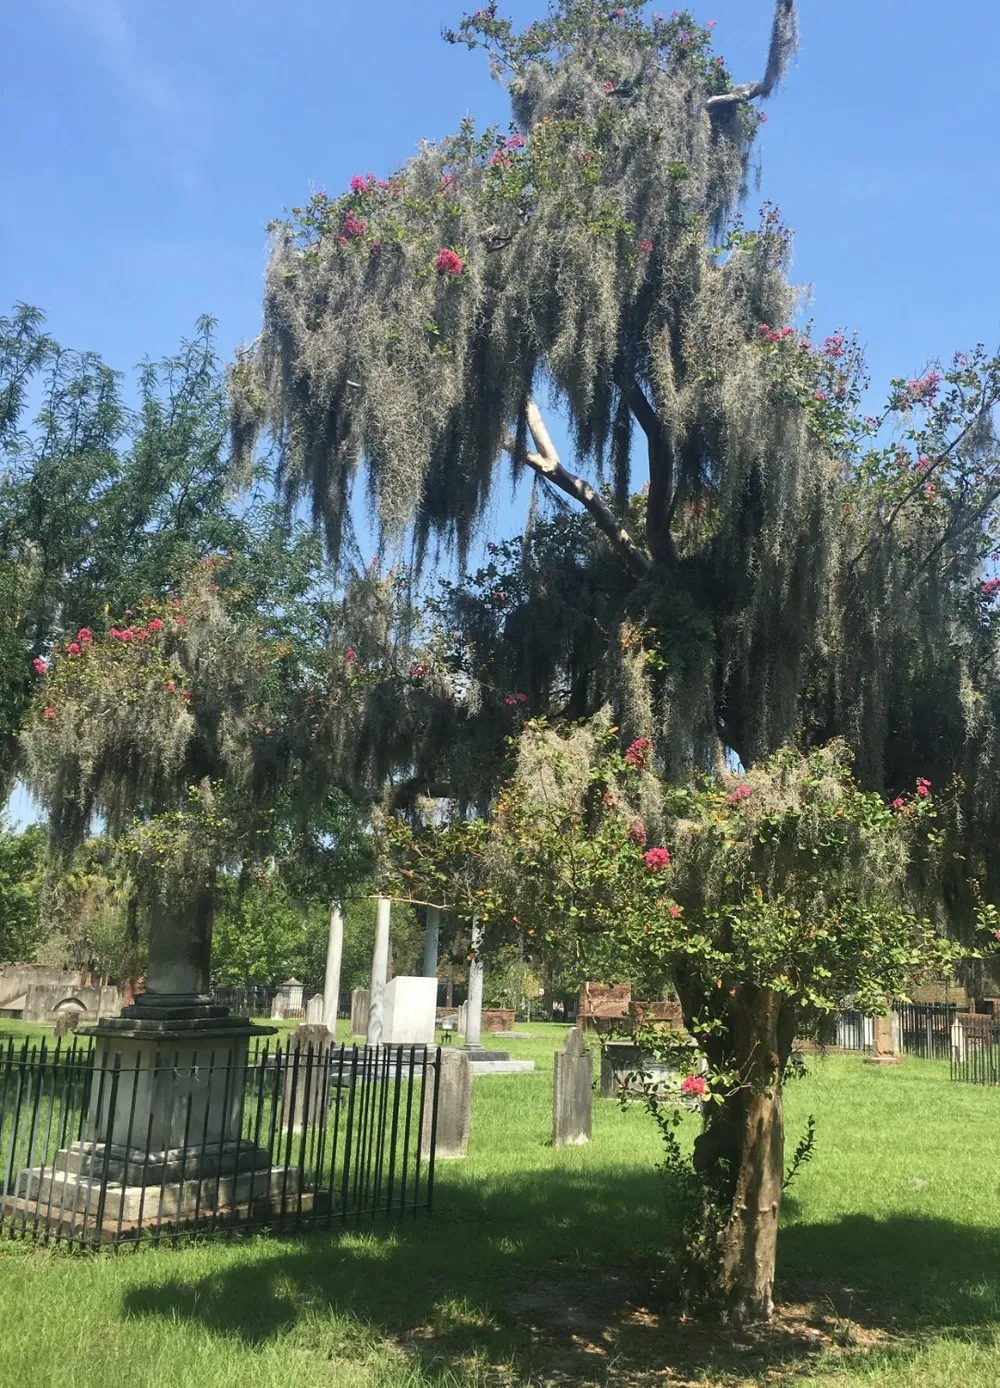 The image captures a serene cemetery setting with a large tree draped in Spanish moss a blooming bush in the foreground and tombstones under a clear blue sky